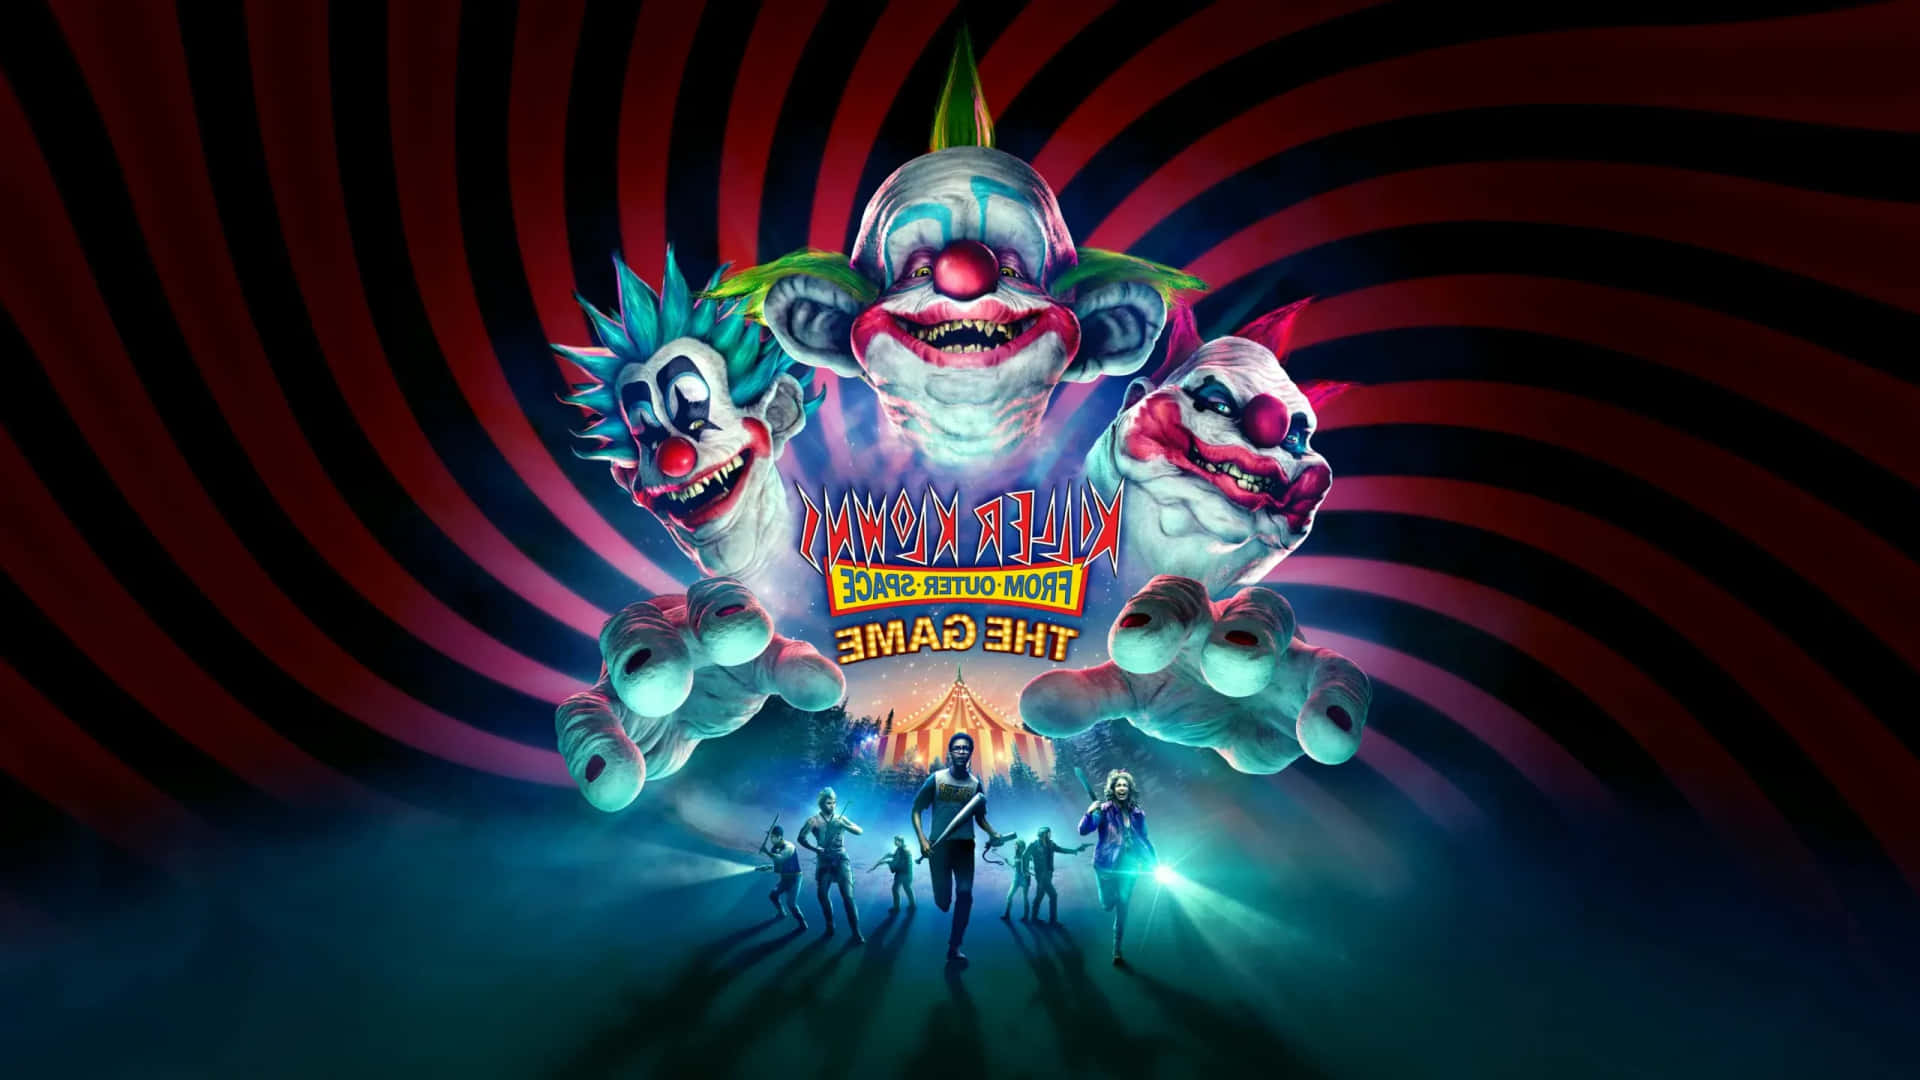 Aggregate more than 68 killer klowns from outer space wallpaper best ...